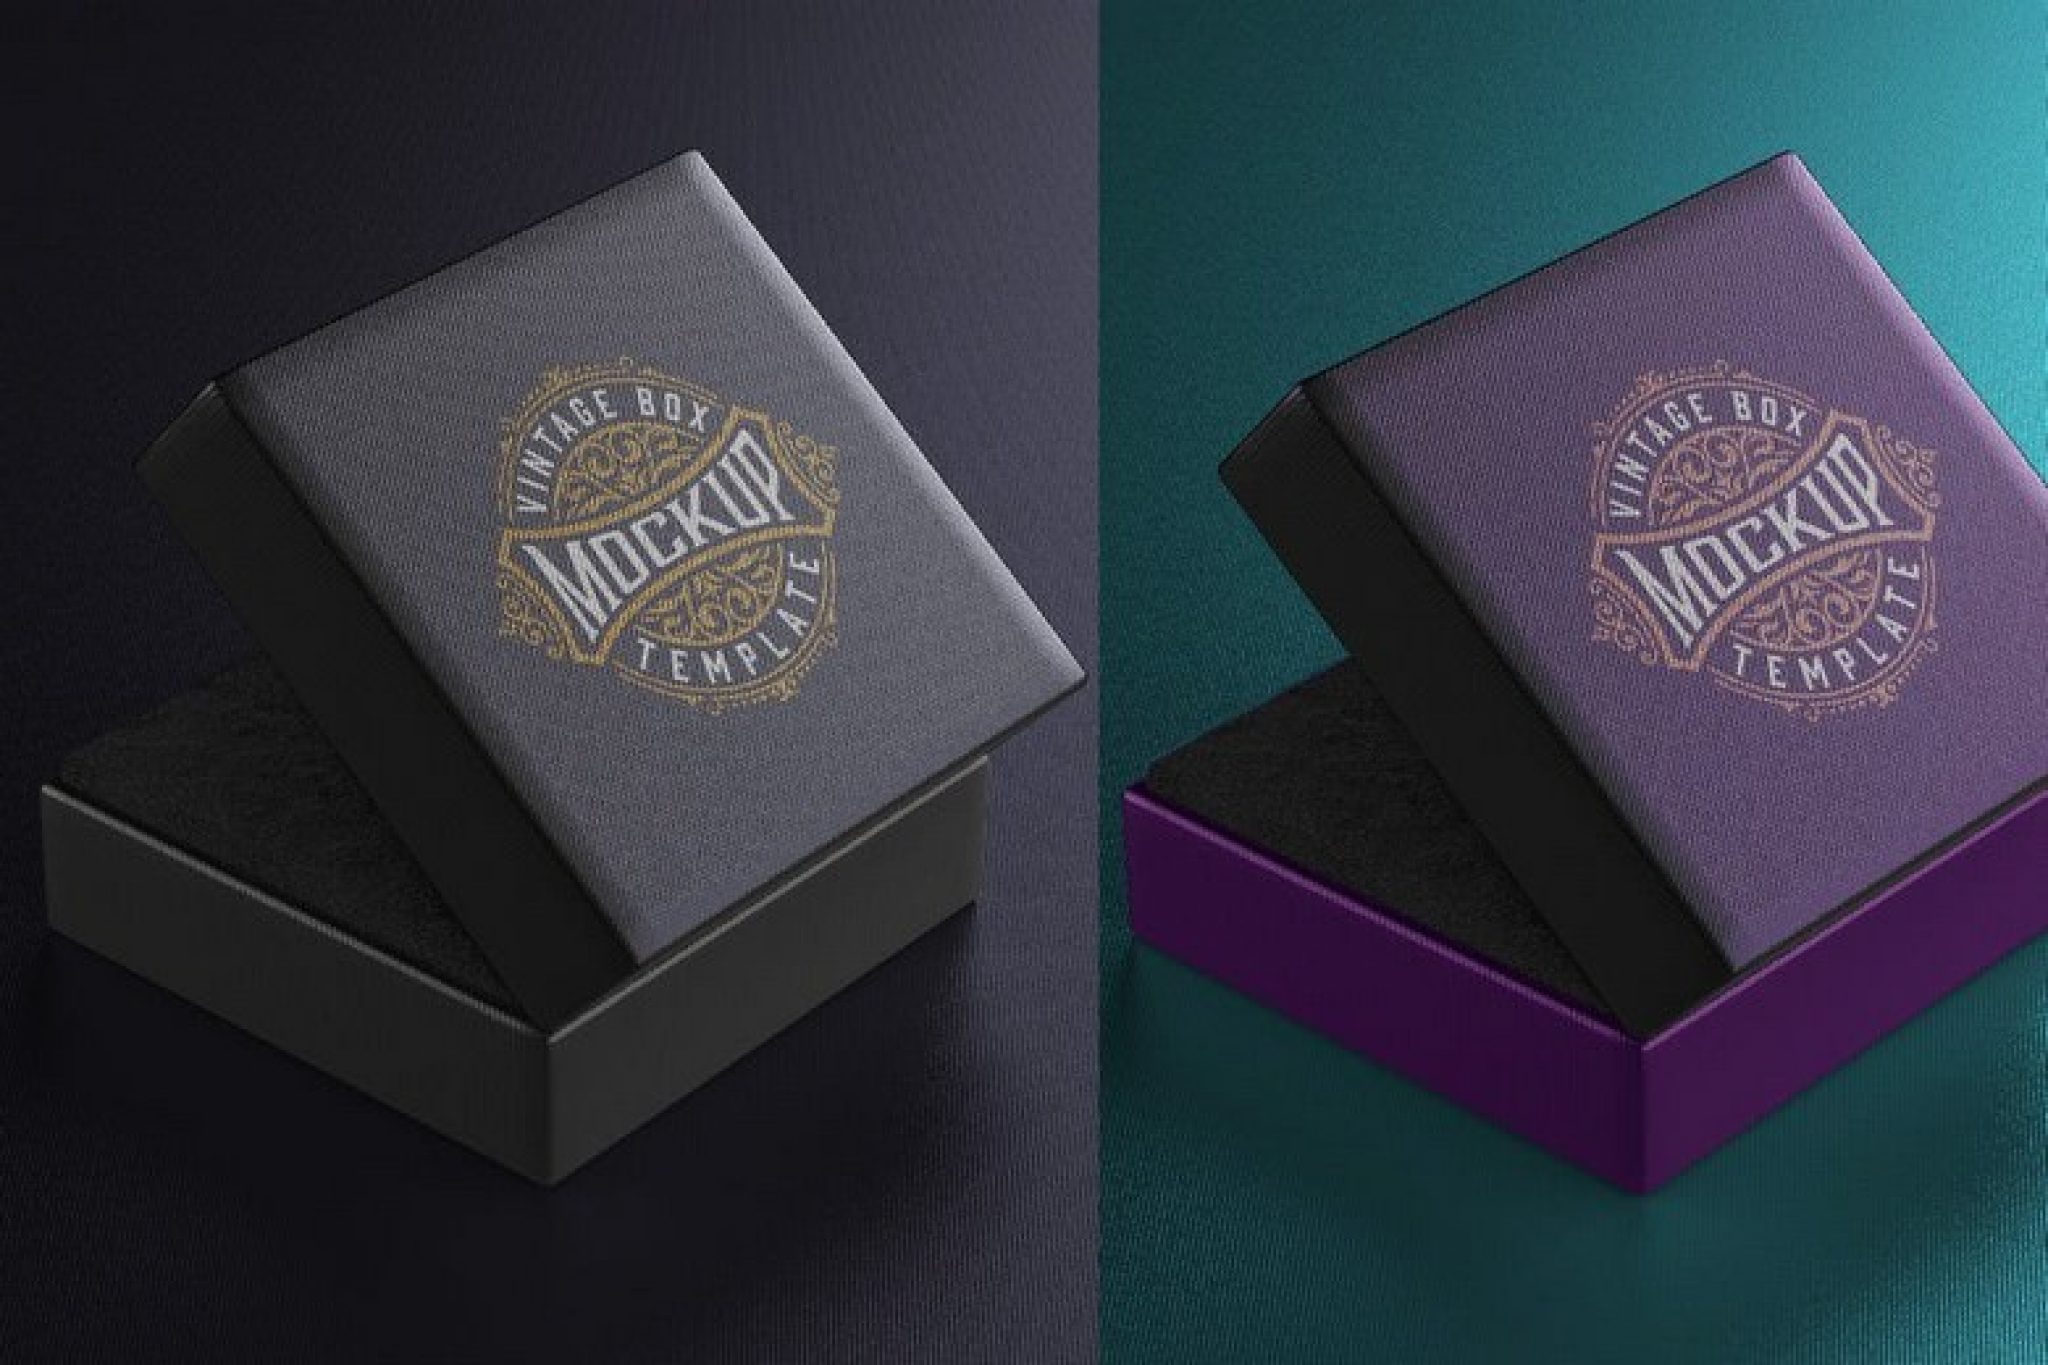 Download 25+ Best Jewelry Mockup PSD Templates 2021 - Templatefor